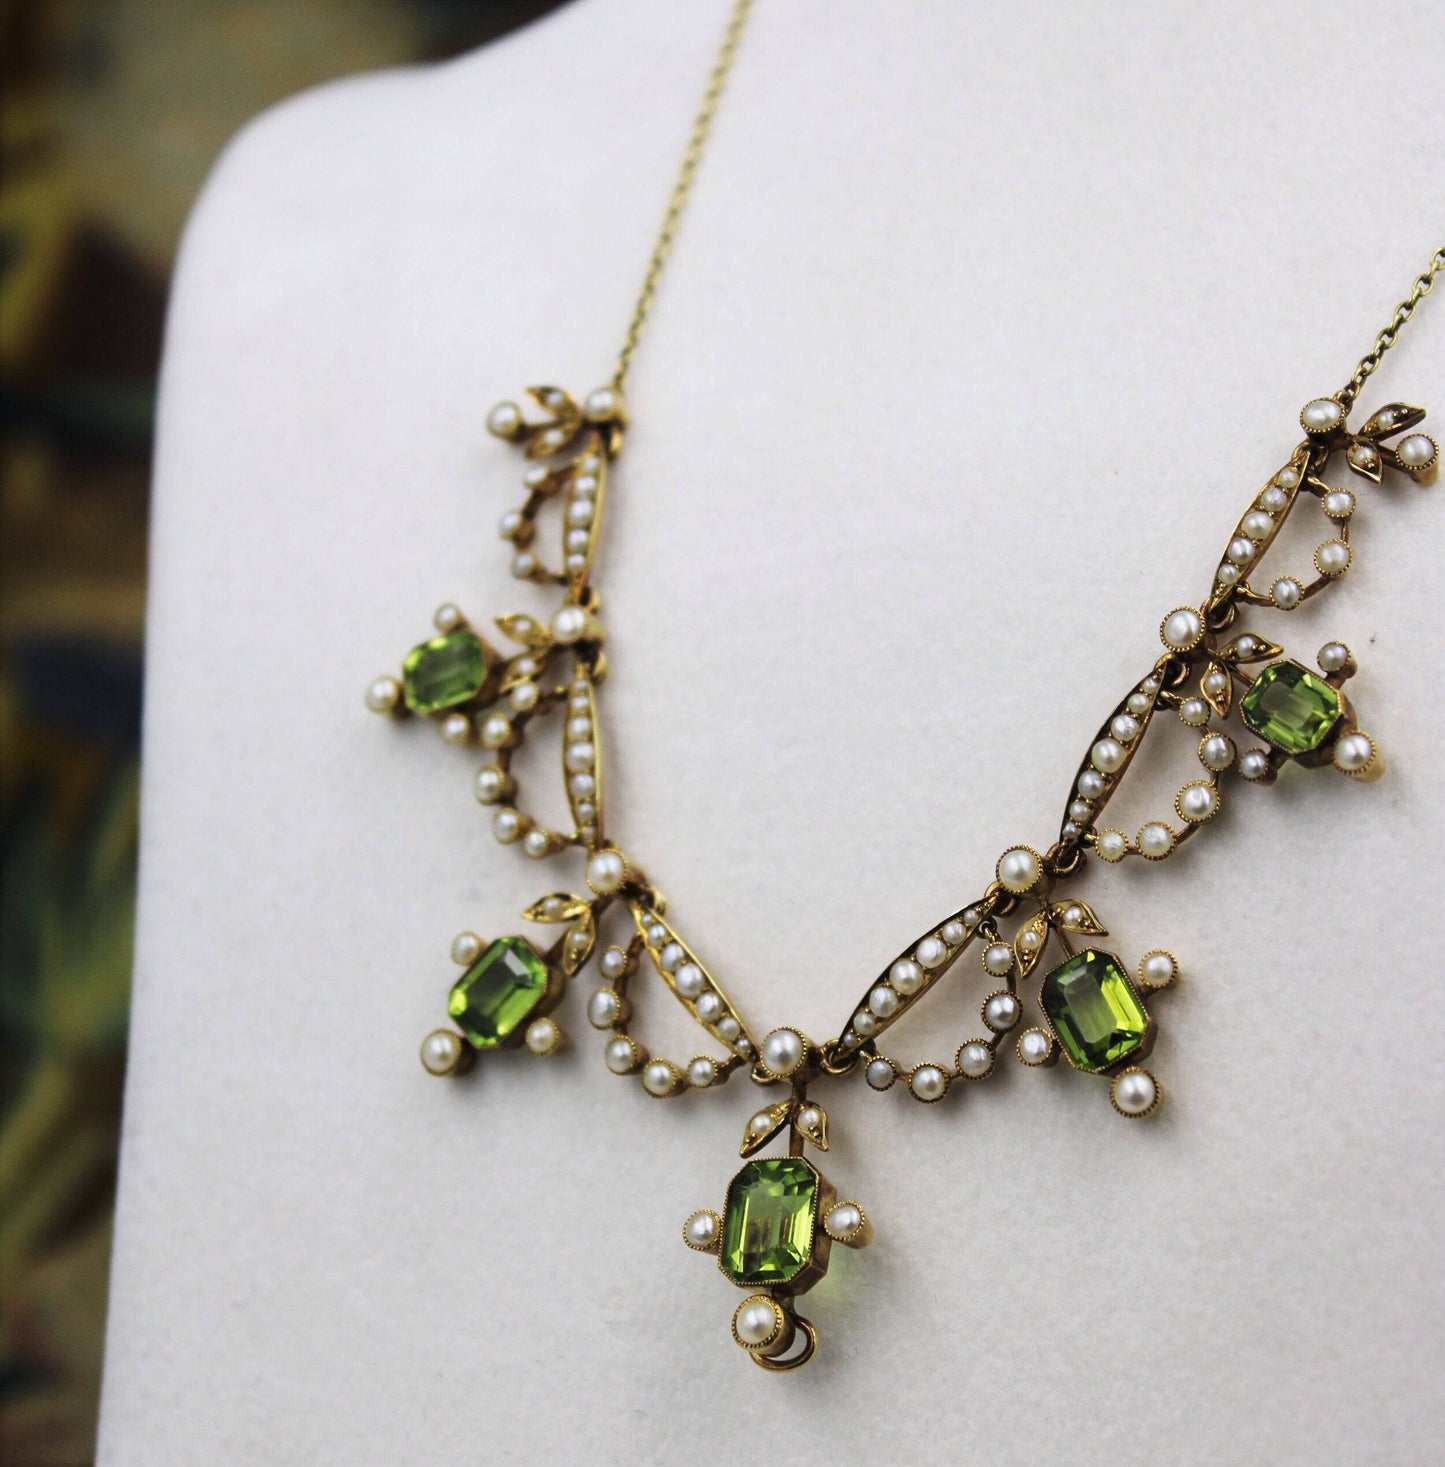 An exquisite Peridot & Seed Pearl Festoon Necklace with a matching Quatrefoil style detachable Pendant/Brooch in 15 Carat Yellow Gold, English, Circa 1900 - Robin Haydock Antiques